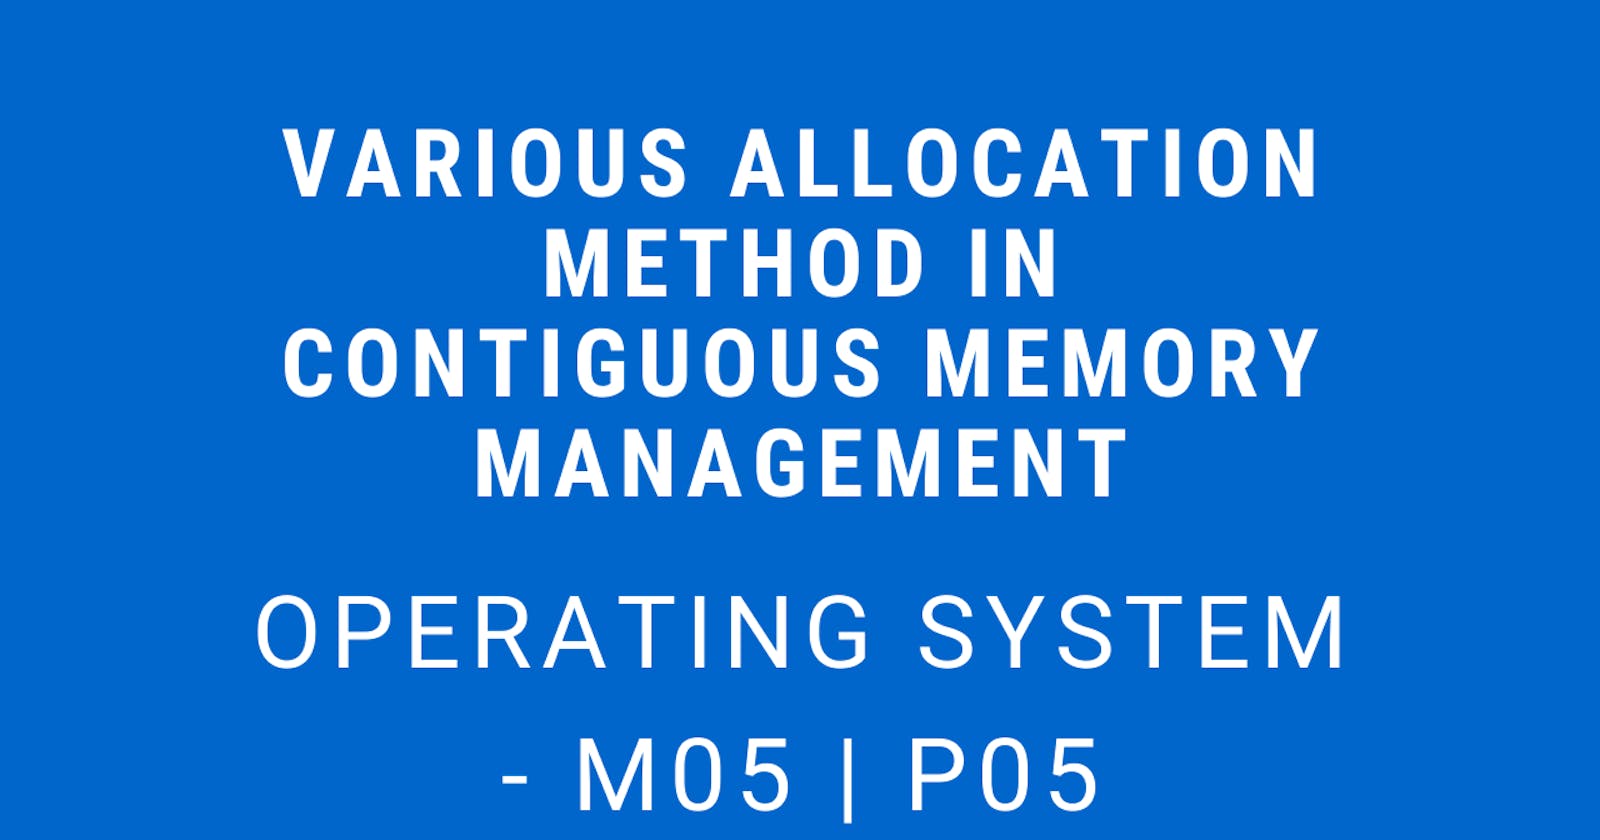 Various Allocation Methods in Contiguous Memory Management | Operating System - M05 P05